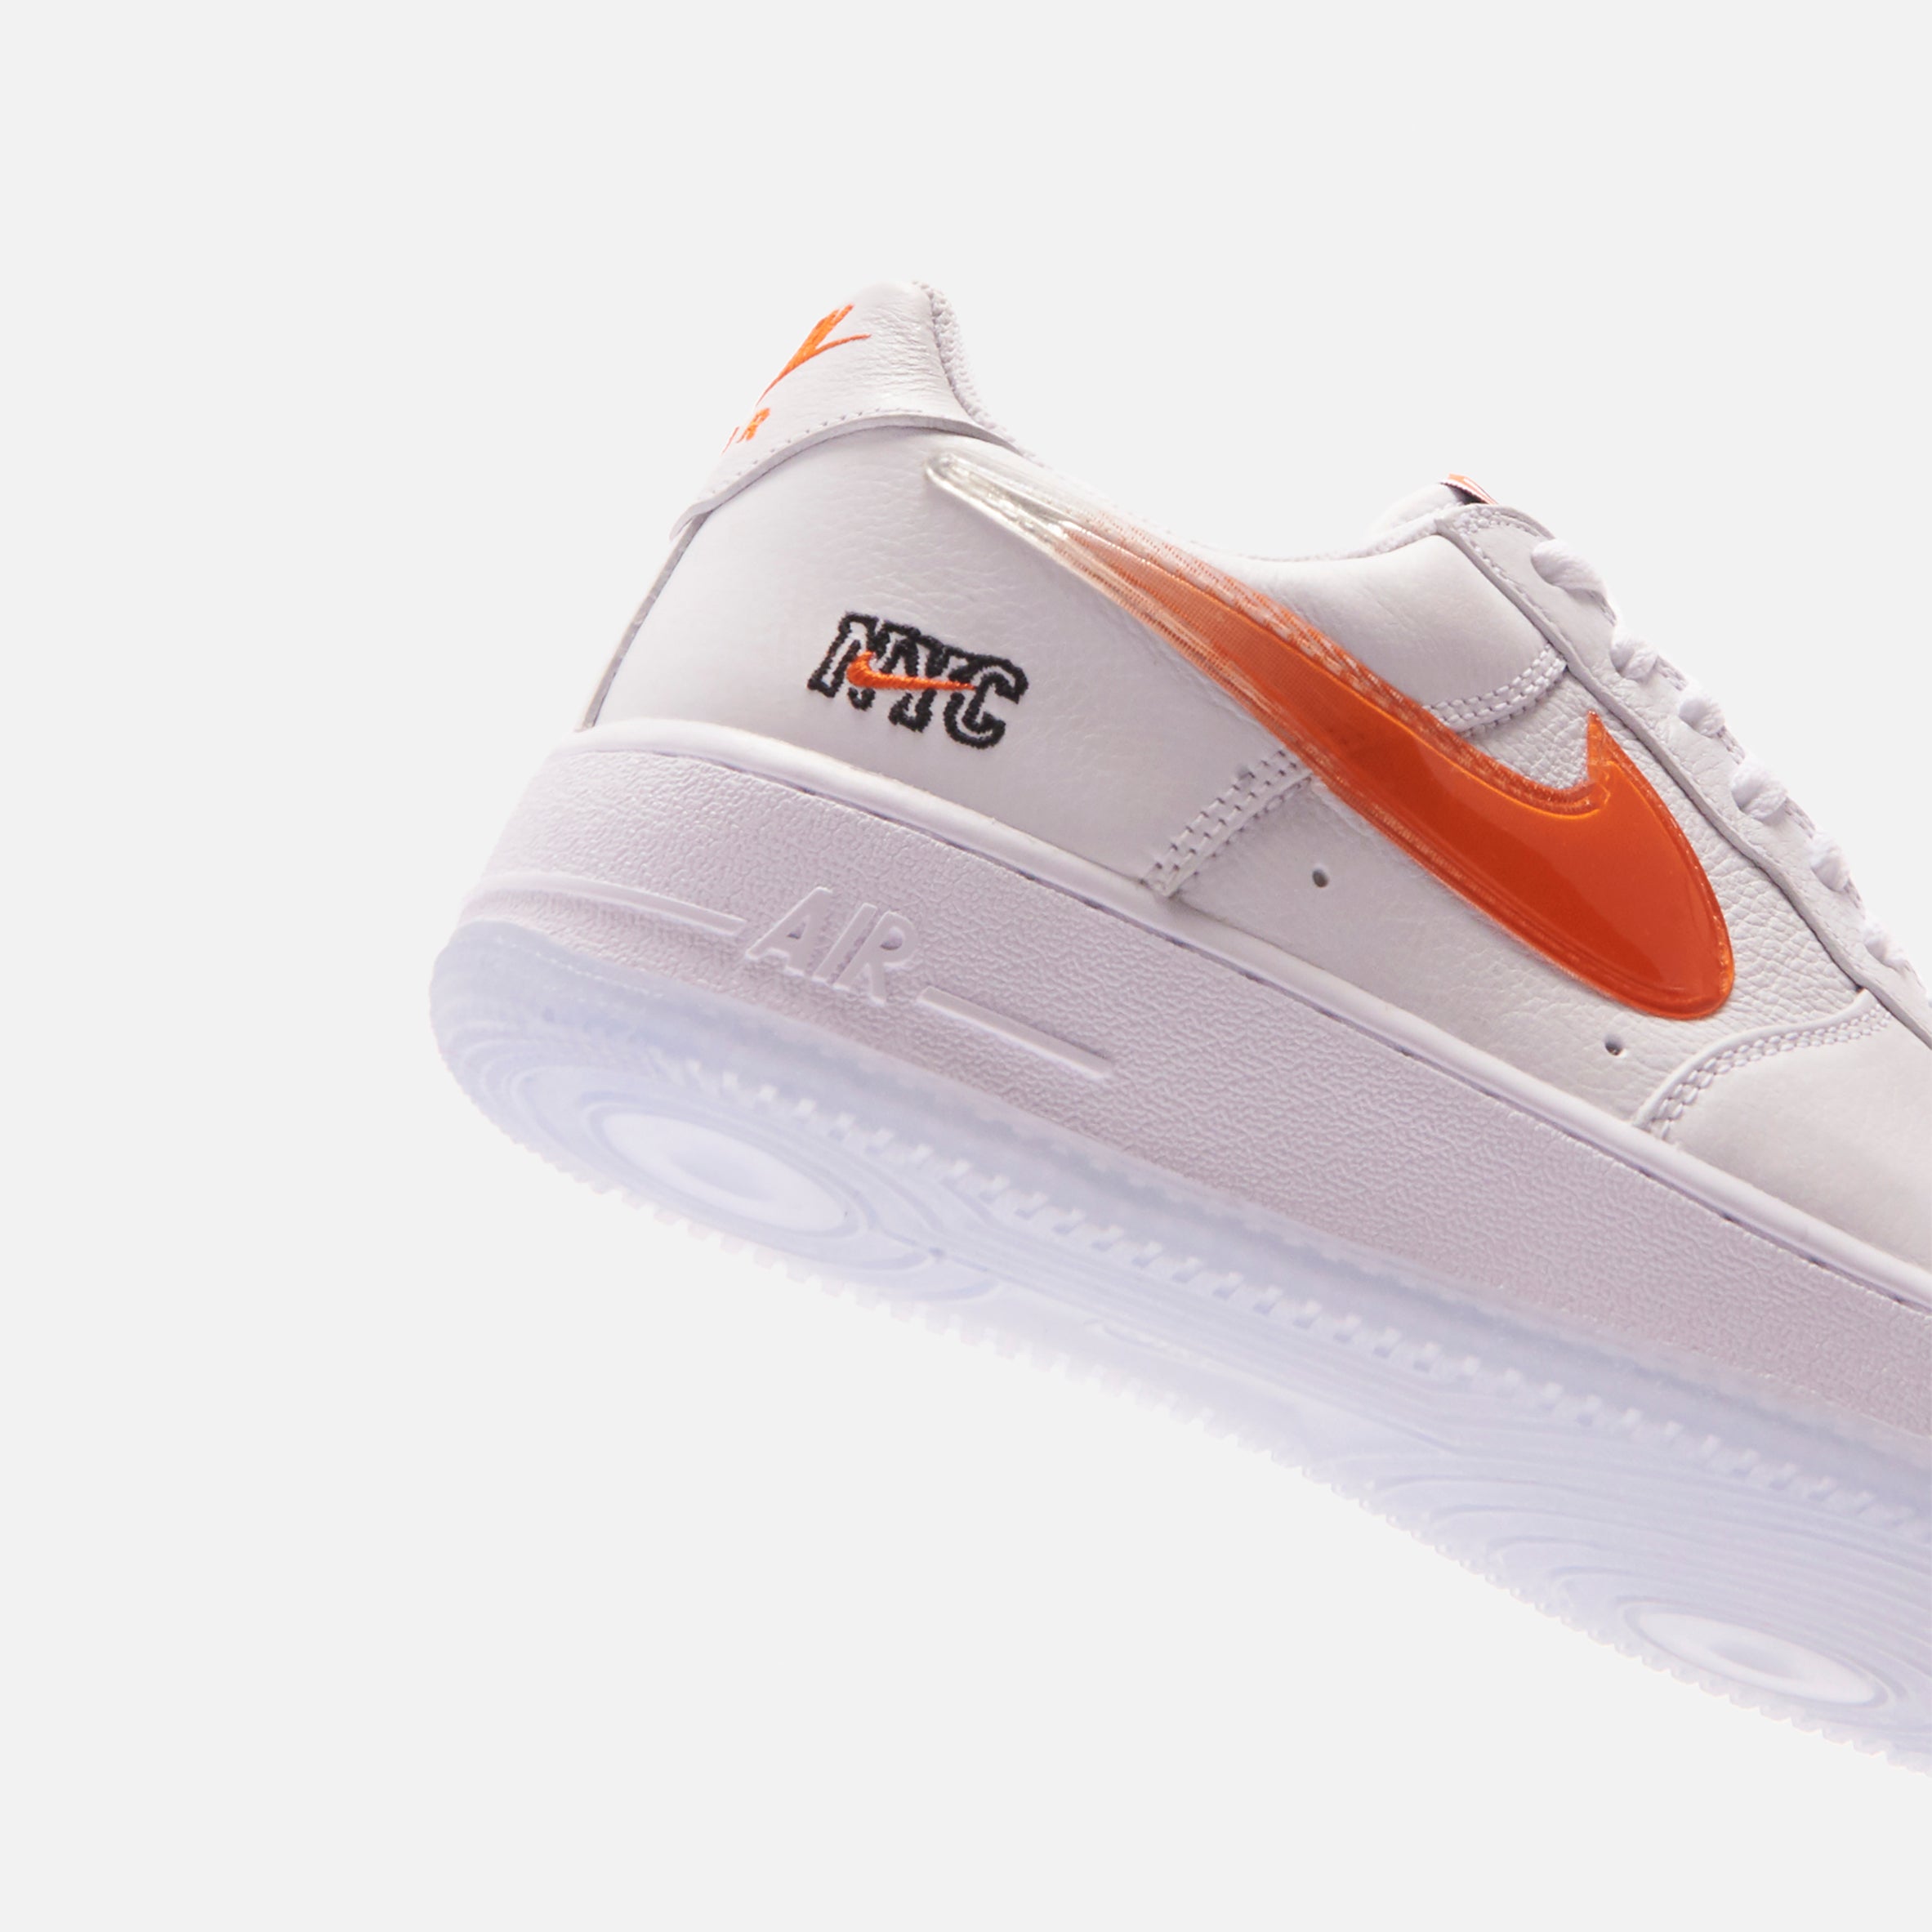 These NYC Nike Air Force 1s Are Releasing Exclusively at KITH